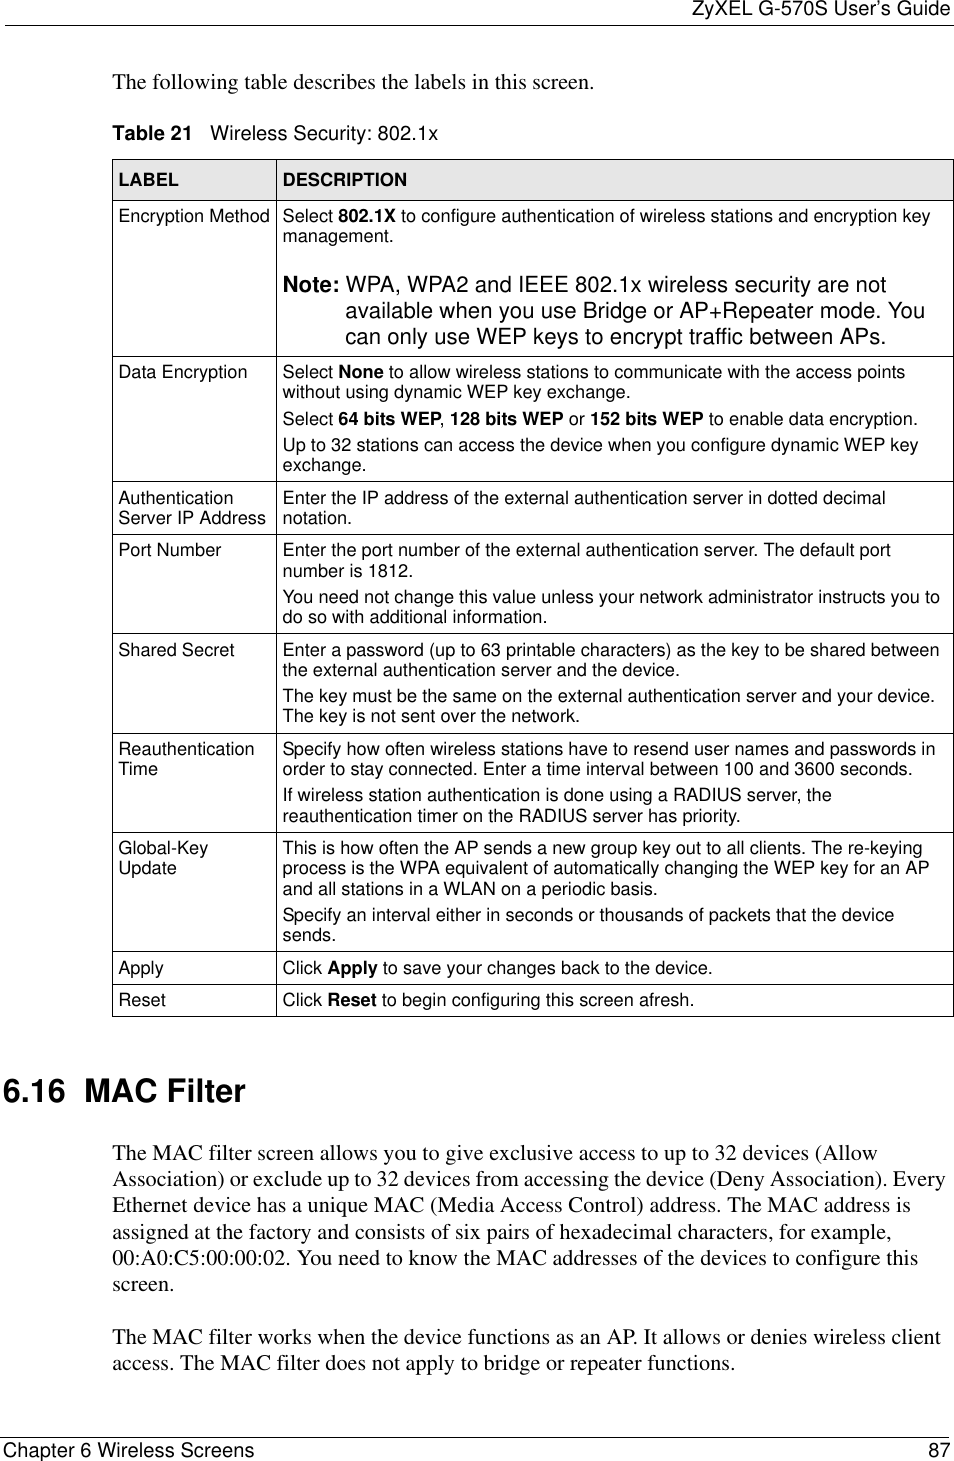 ZyXEL G-570S User’s GuideChapter 6 Wireless Screens 87The following table describes the labels in this screen. 6.16  MAC Filter The MAC filter screen allows you to give exclusive access to up to 32 devices (Allow Association) or exclude up to 32 devices from accessing the device (Deny Association). Every Ethernet device has a unique MAC (Media Access Control) address. The MAC address is assigned at the factory and consists of six pairs of hexadecimal characters, for example, 00:A0:C5:00:00:02. You need to know the MAC addresses of the devices to configure this screen.The MAC filter works when the device functions as an AP. It allows or denies wireless client access. The MAC filter does not apply to bridge or repeater functions.Table 21   Wireless Security: 802.1xLABEL DESCRIPTIONEncryption Method Select 802.1X to configure authentication of wireless stations and encryption key management.Note: WPA, WPA2 and IEEE 802.1x wireless security are not available when you use Bridge or AP+Repeater mode. You can only use WEP keys to encrypt traffic between APs.Data Encryption Select None to allow wireless stations to communicate with the access points without using dynamic WEP key exchange. Select 64 bits WEP,128 bits WEP or 152 bits WEP to enable data encryption. Up to 32 stations can access the device when you configure dynamic WEP key exchange.Authentication Server IP Address Enter the IP address of the external authentication server in dotted decimal notation.Port Number Enter the port number of the external authentication server. The default port number is 1812.You need not change this value unless your network administrator instructs you to do so with additional information.Shared Secret Enter a password (up to 63 printable characters) as the key to be shared between the external authentication server and the device.The key must be the same on the external authentication server and your device. The key is not sent over the network.Reauthentication Time Specify how often wireless stations have to resend user names and passwords in order to stay connected. Enter a time interval between 100 and 3600 seconds. If wireless station authentication is done using a RADIUS server, the reauthentication timer on the RADIUS server has priority. Global-Key Update This is how often the AP sends a new group key out to all clients. The re-keying process is the WPA equivalent of automatically changing the WEP key for an AP and all stations in a WLAN on a periodic basis. Specify an interval either in seconds or thousands of packets that the device sends.Apply Click Apply to save your changes back to the device.Reset Click Reset to begin configuring this screen afresh.